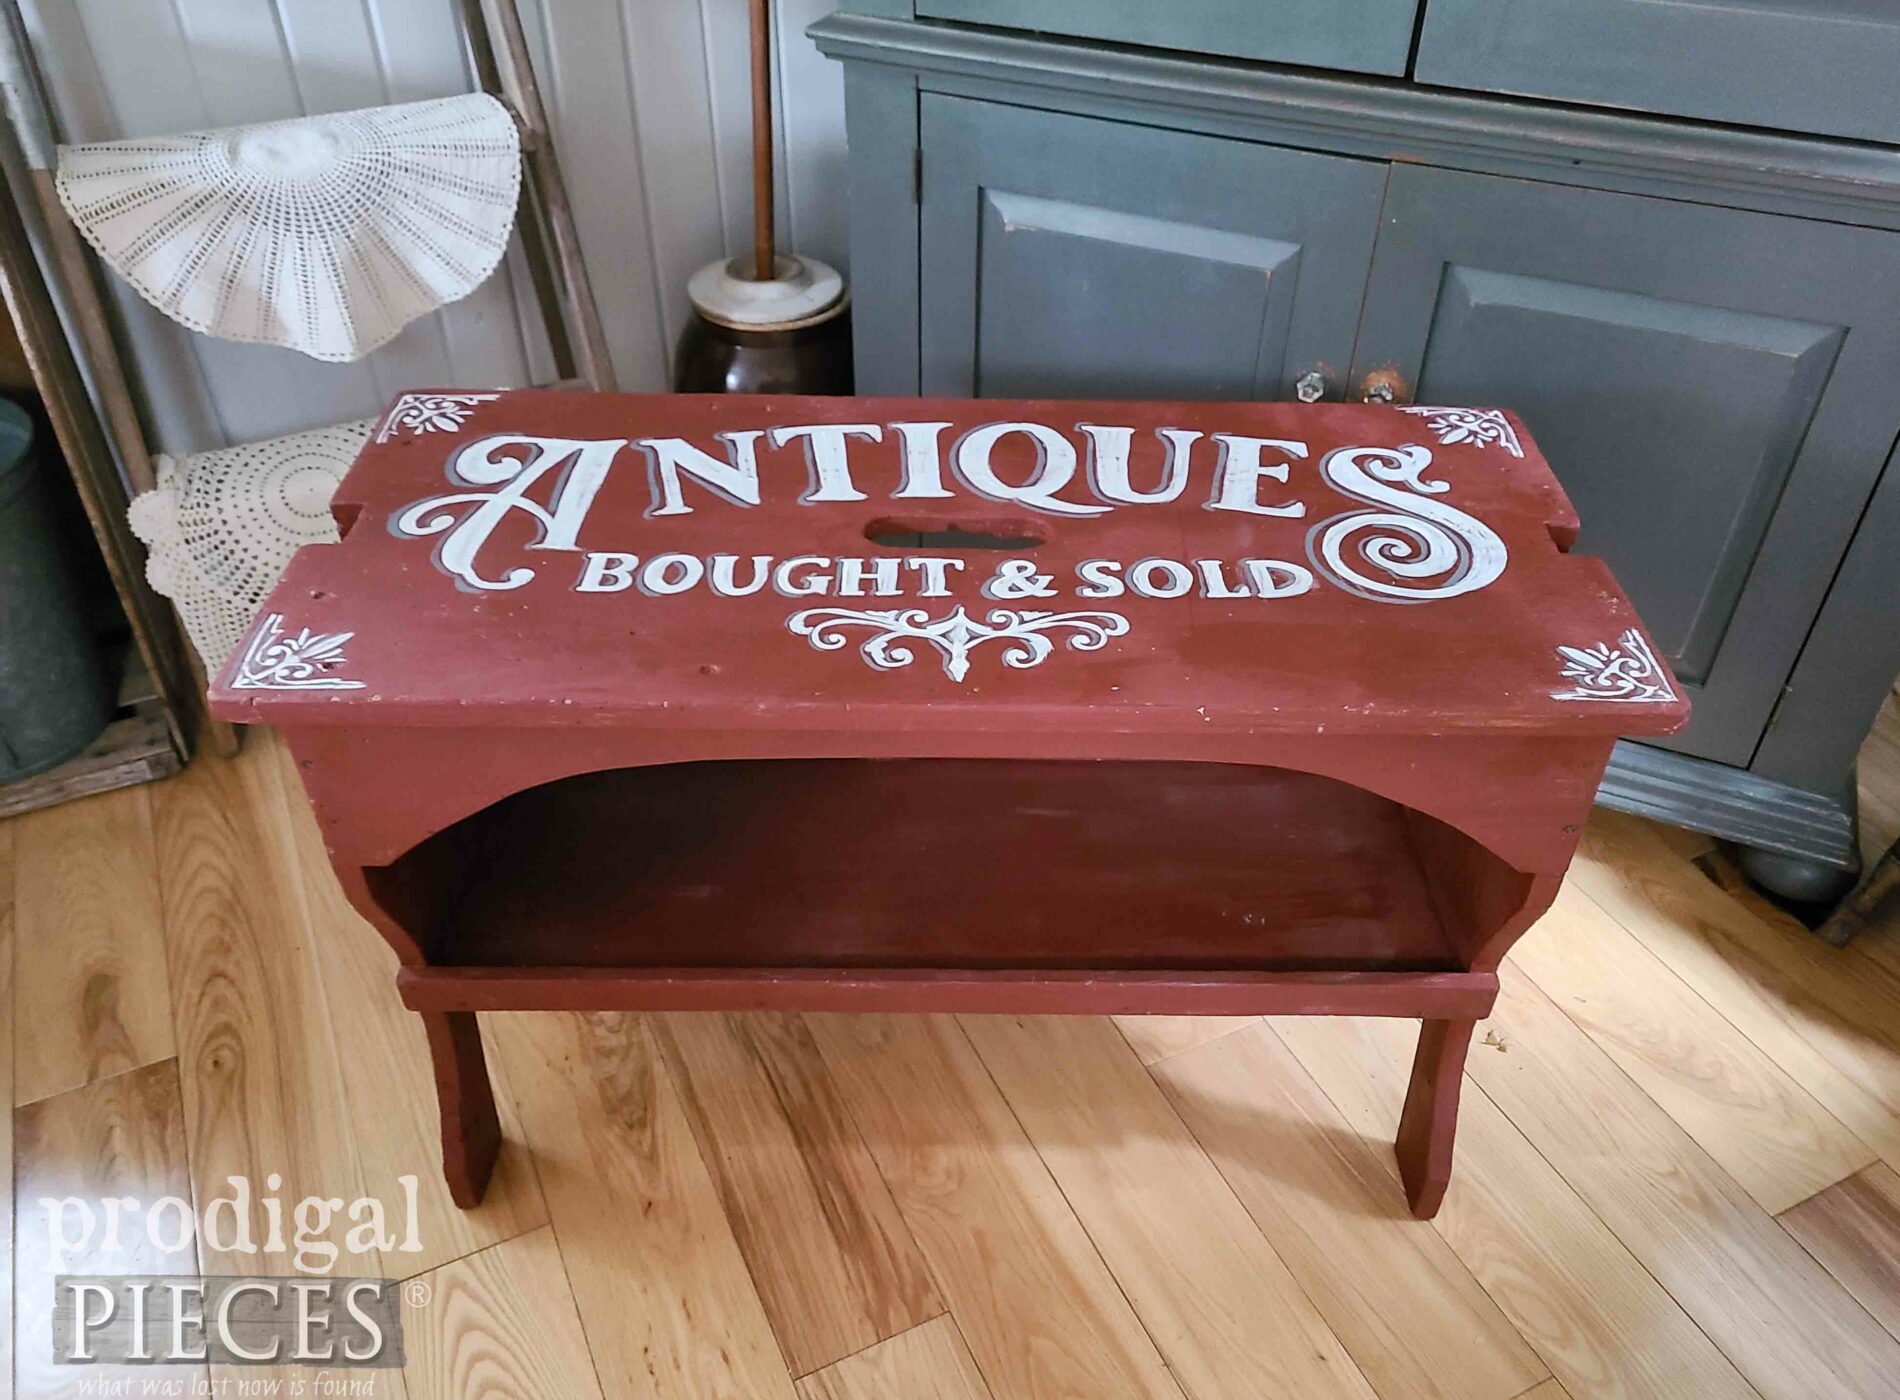 Vintage Farmhouse Bench with Typography available at Prodigal Pieces | shop.prodigalpieces.com #prodigalpieces